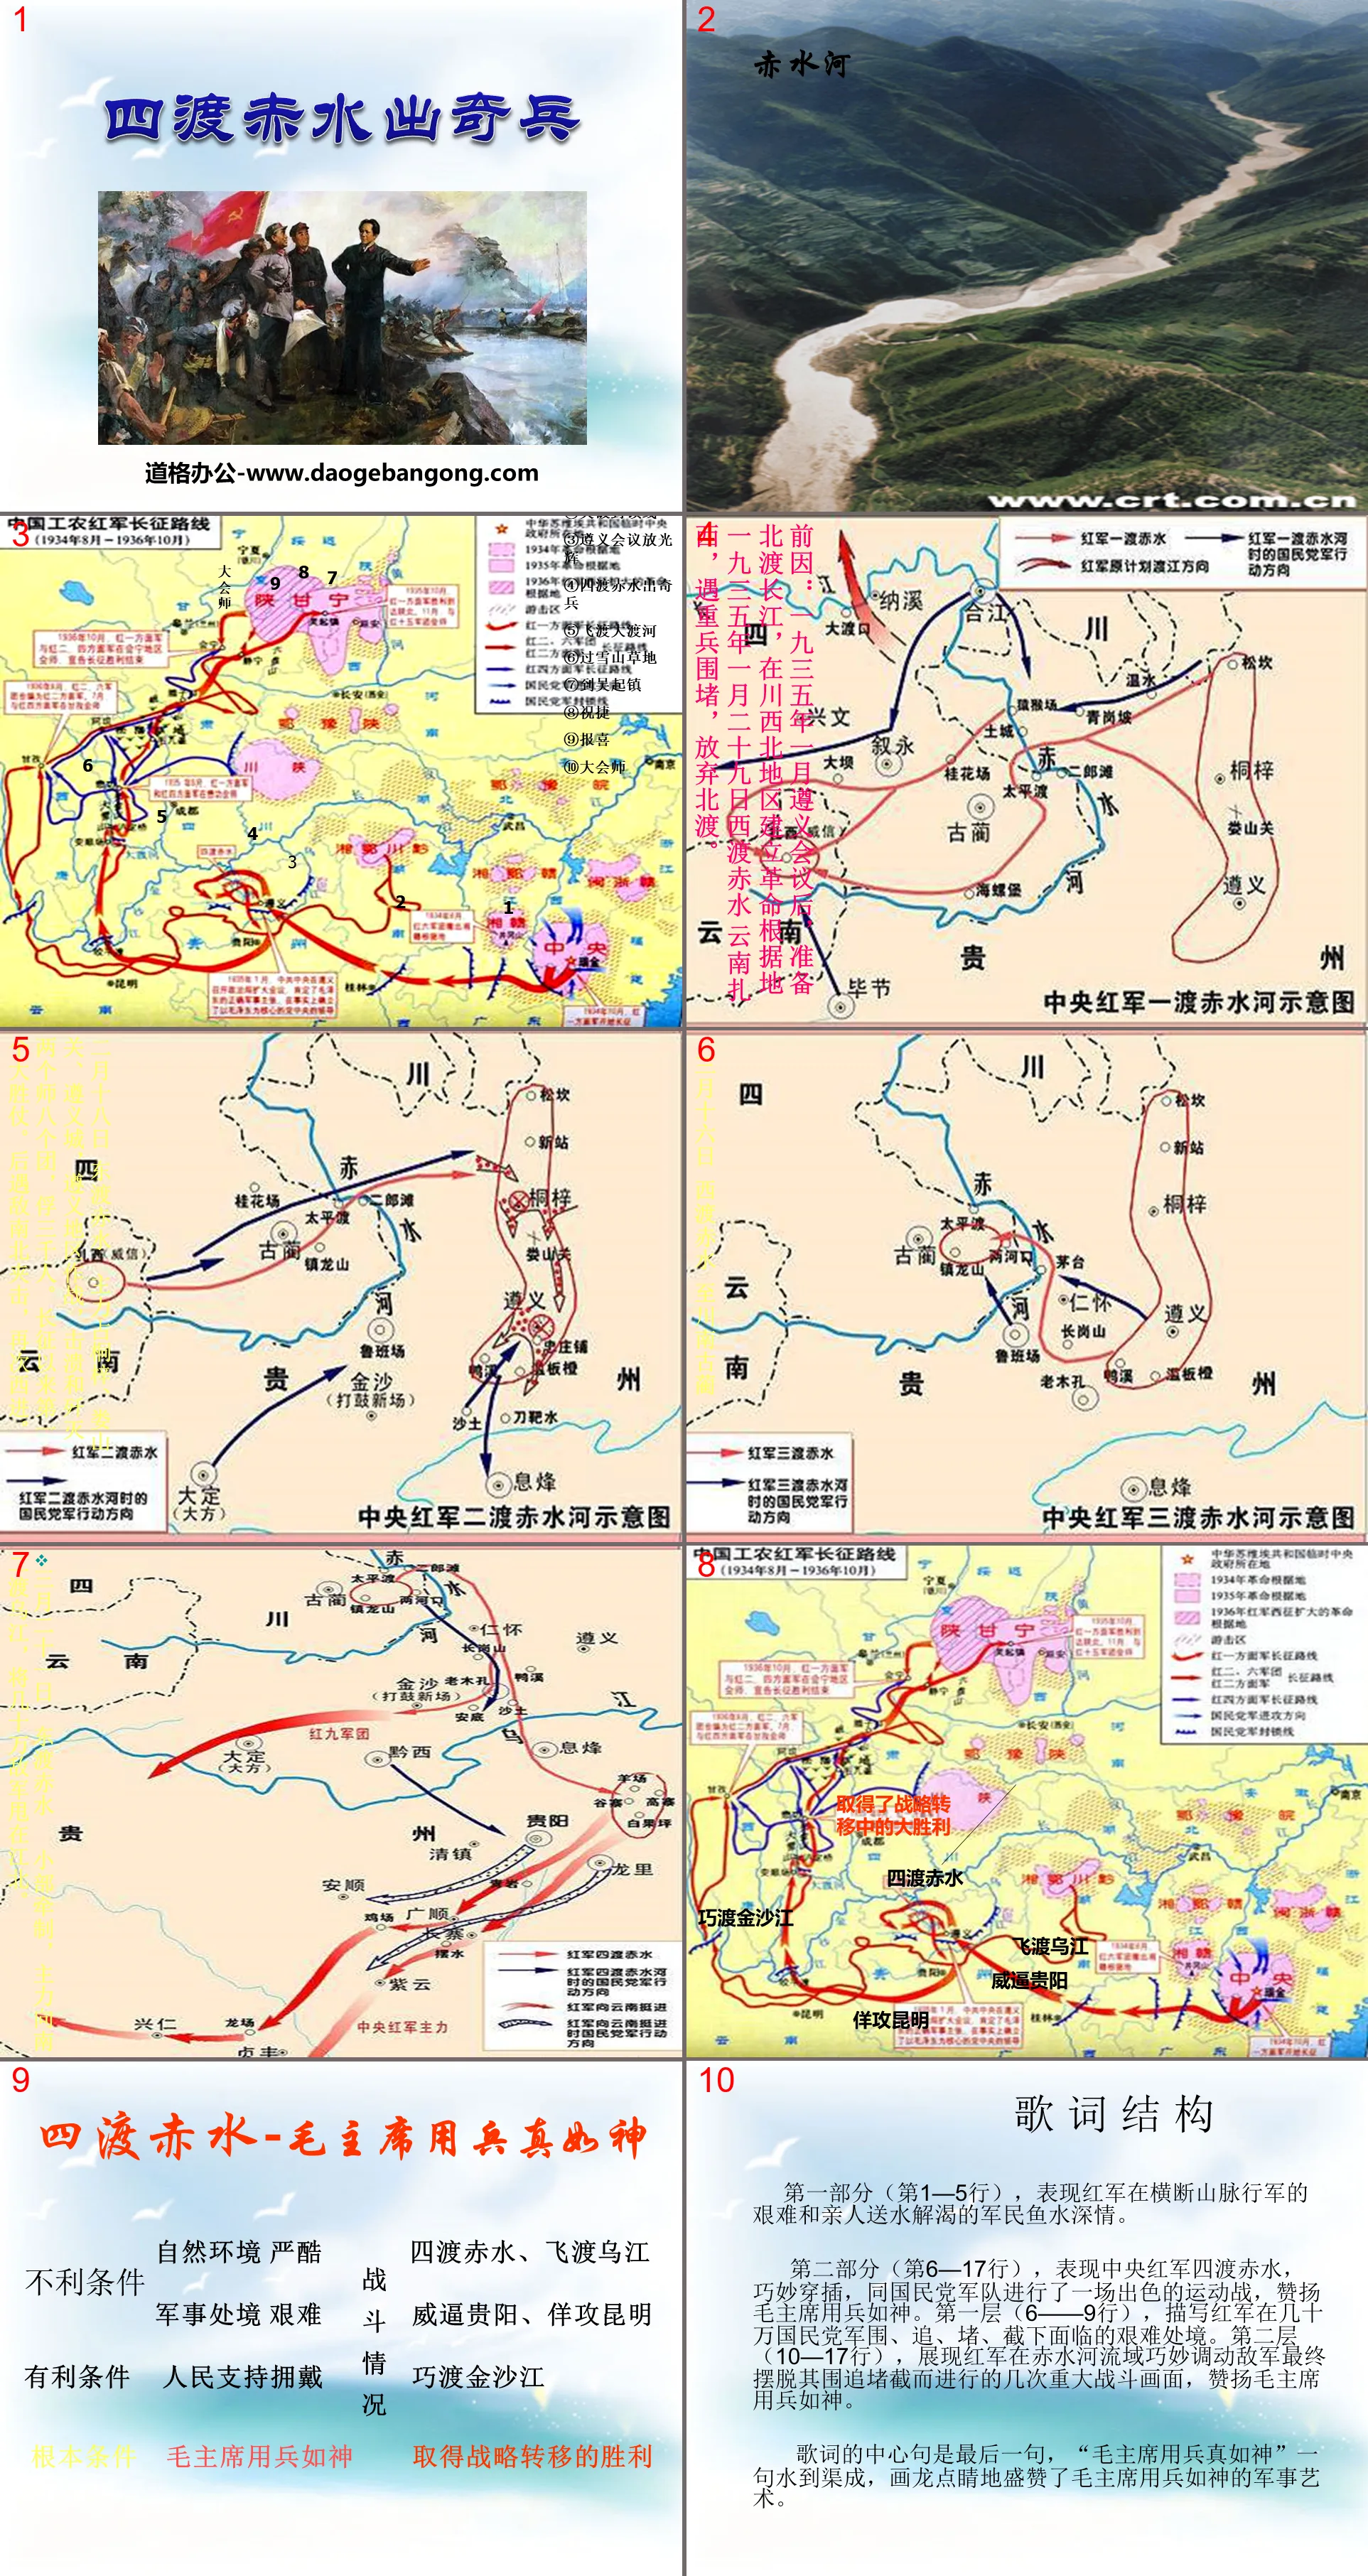 PPT courseware of "Surprise Soldiers crossing the Chishui River Four Times"